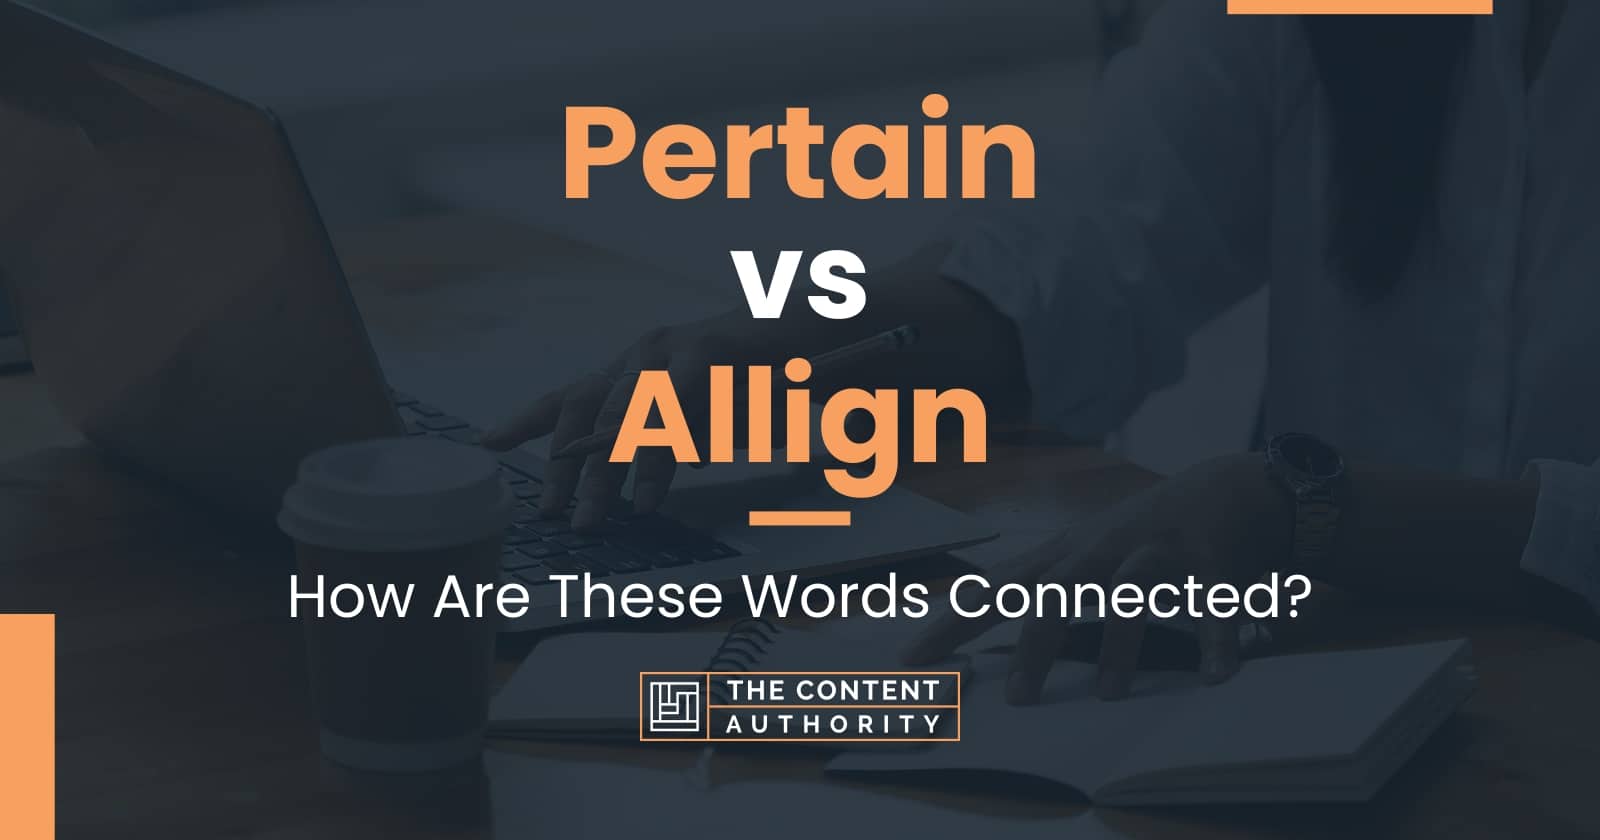 Pertain vs Allign: How Are These Words Connected?